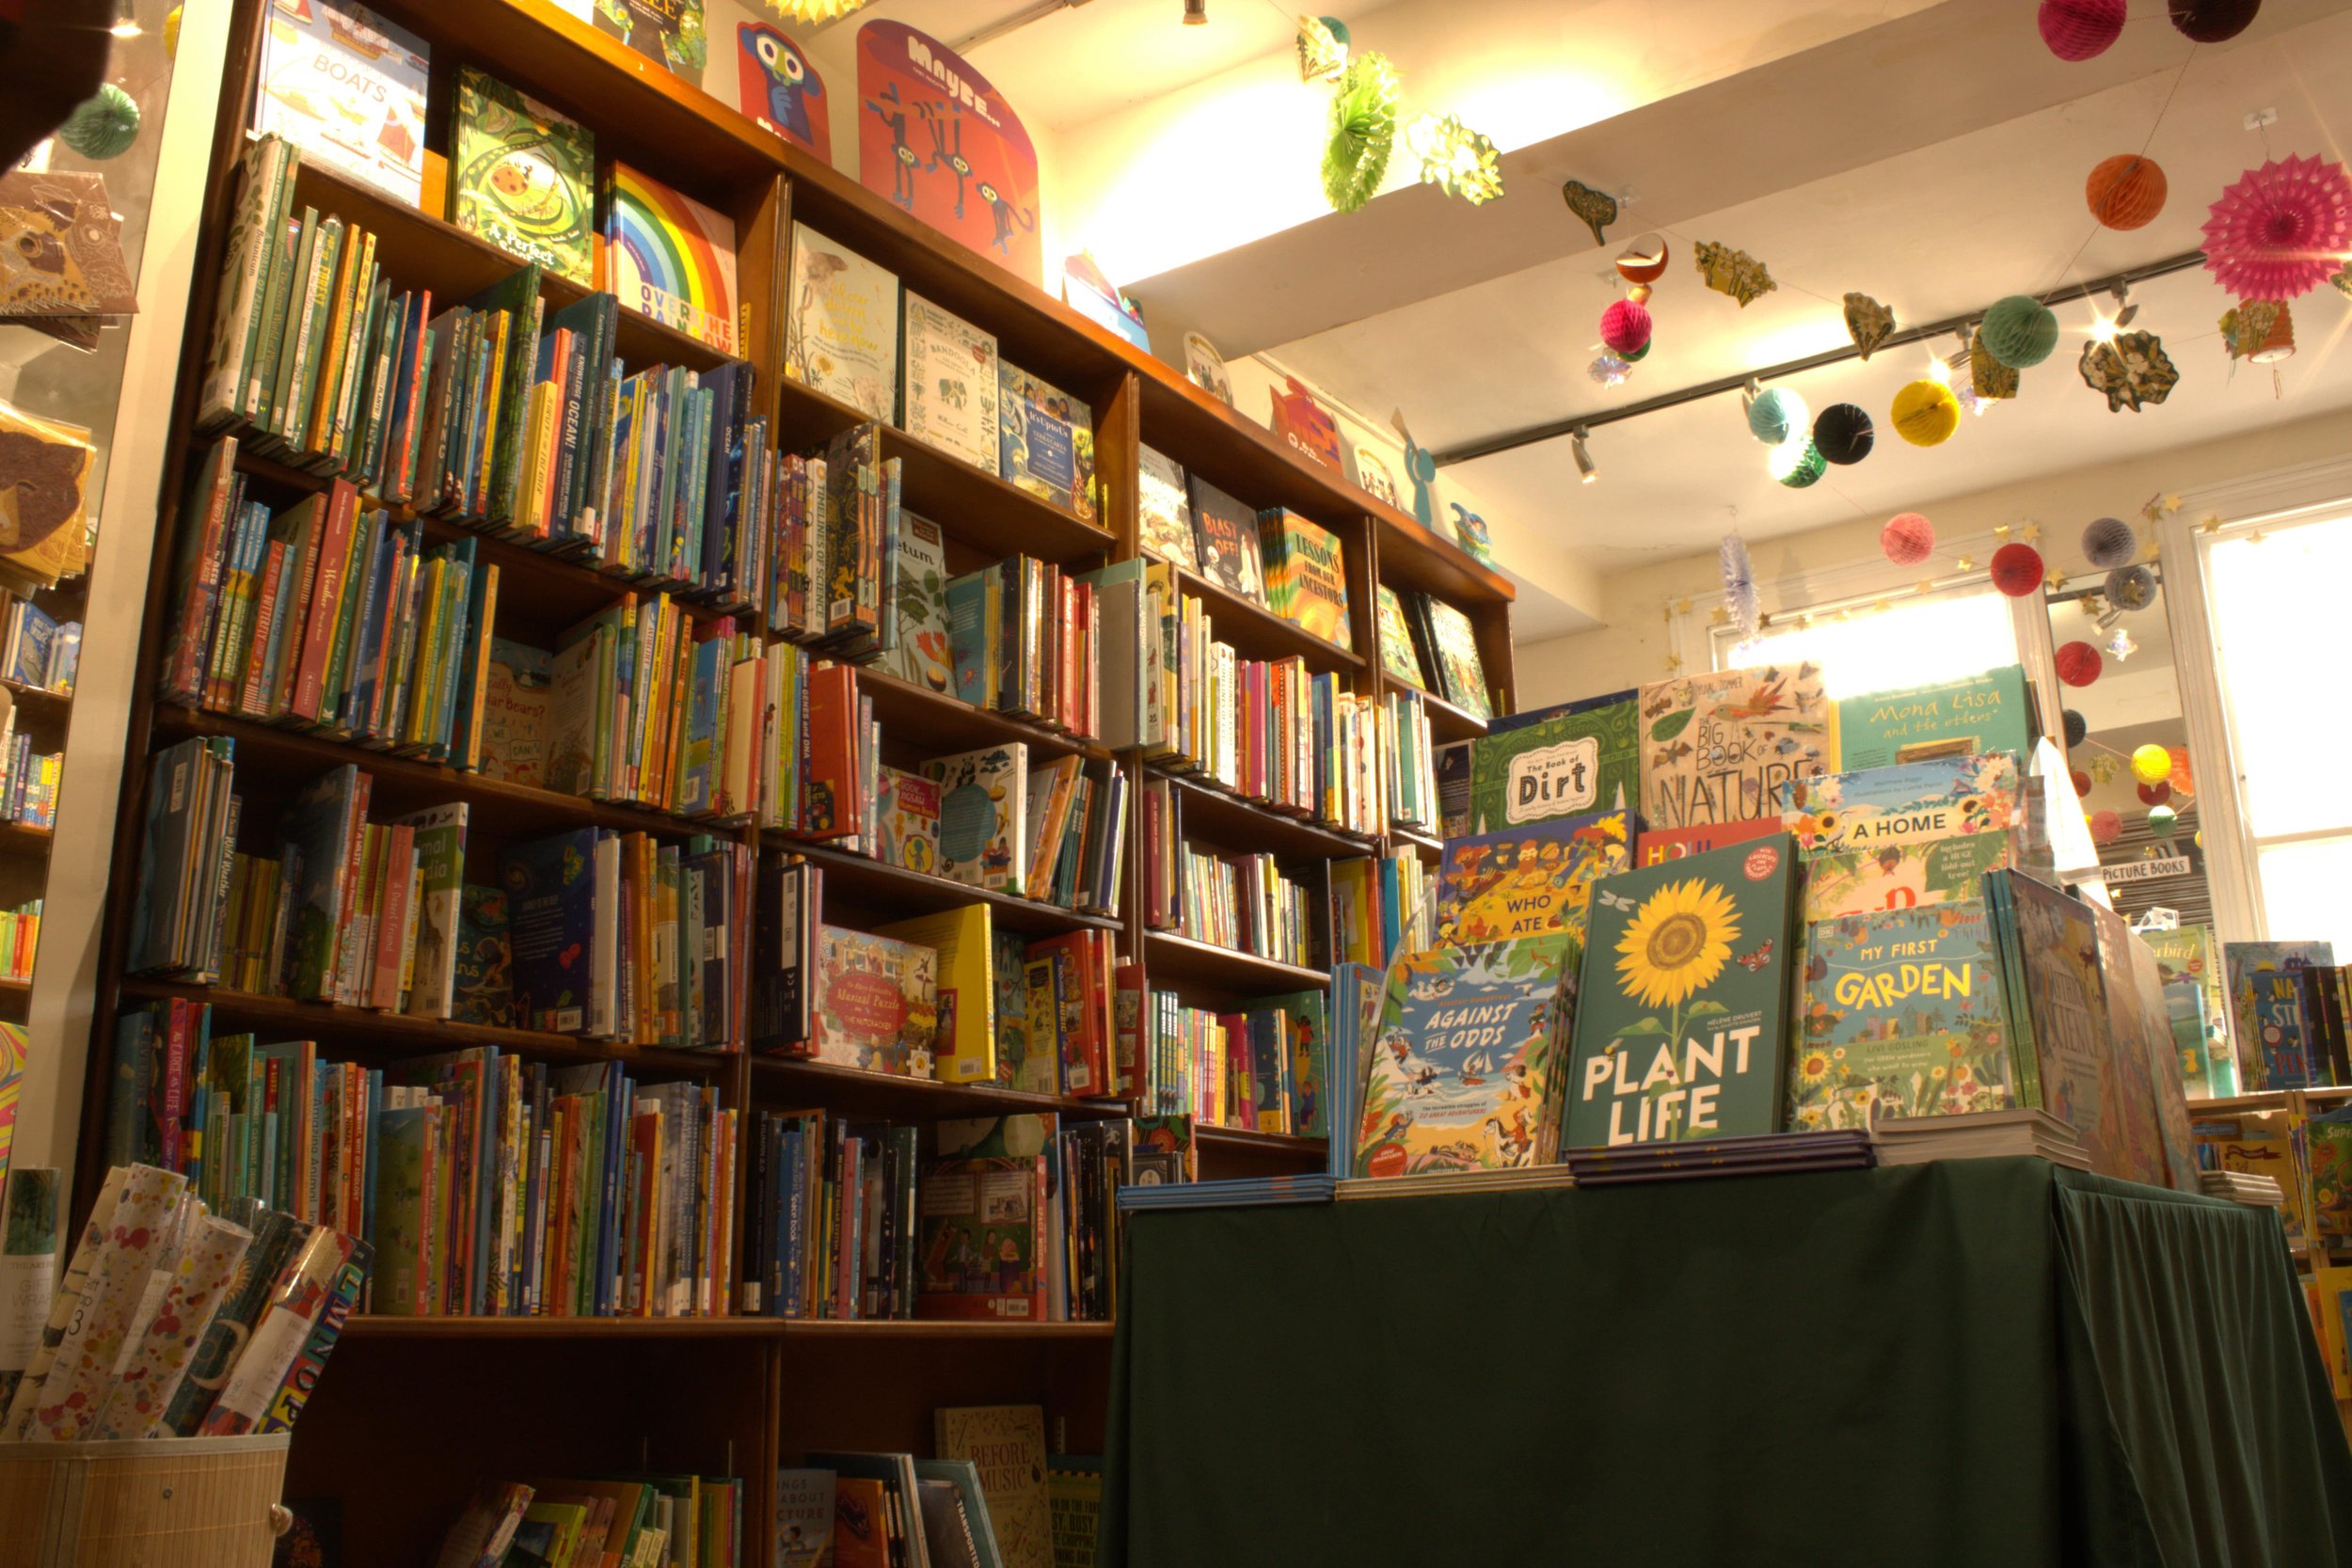 A look inside West End Lane Books